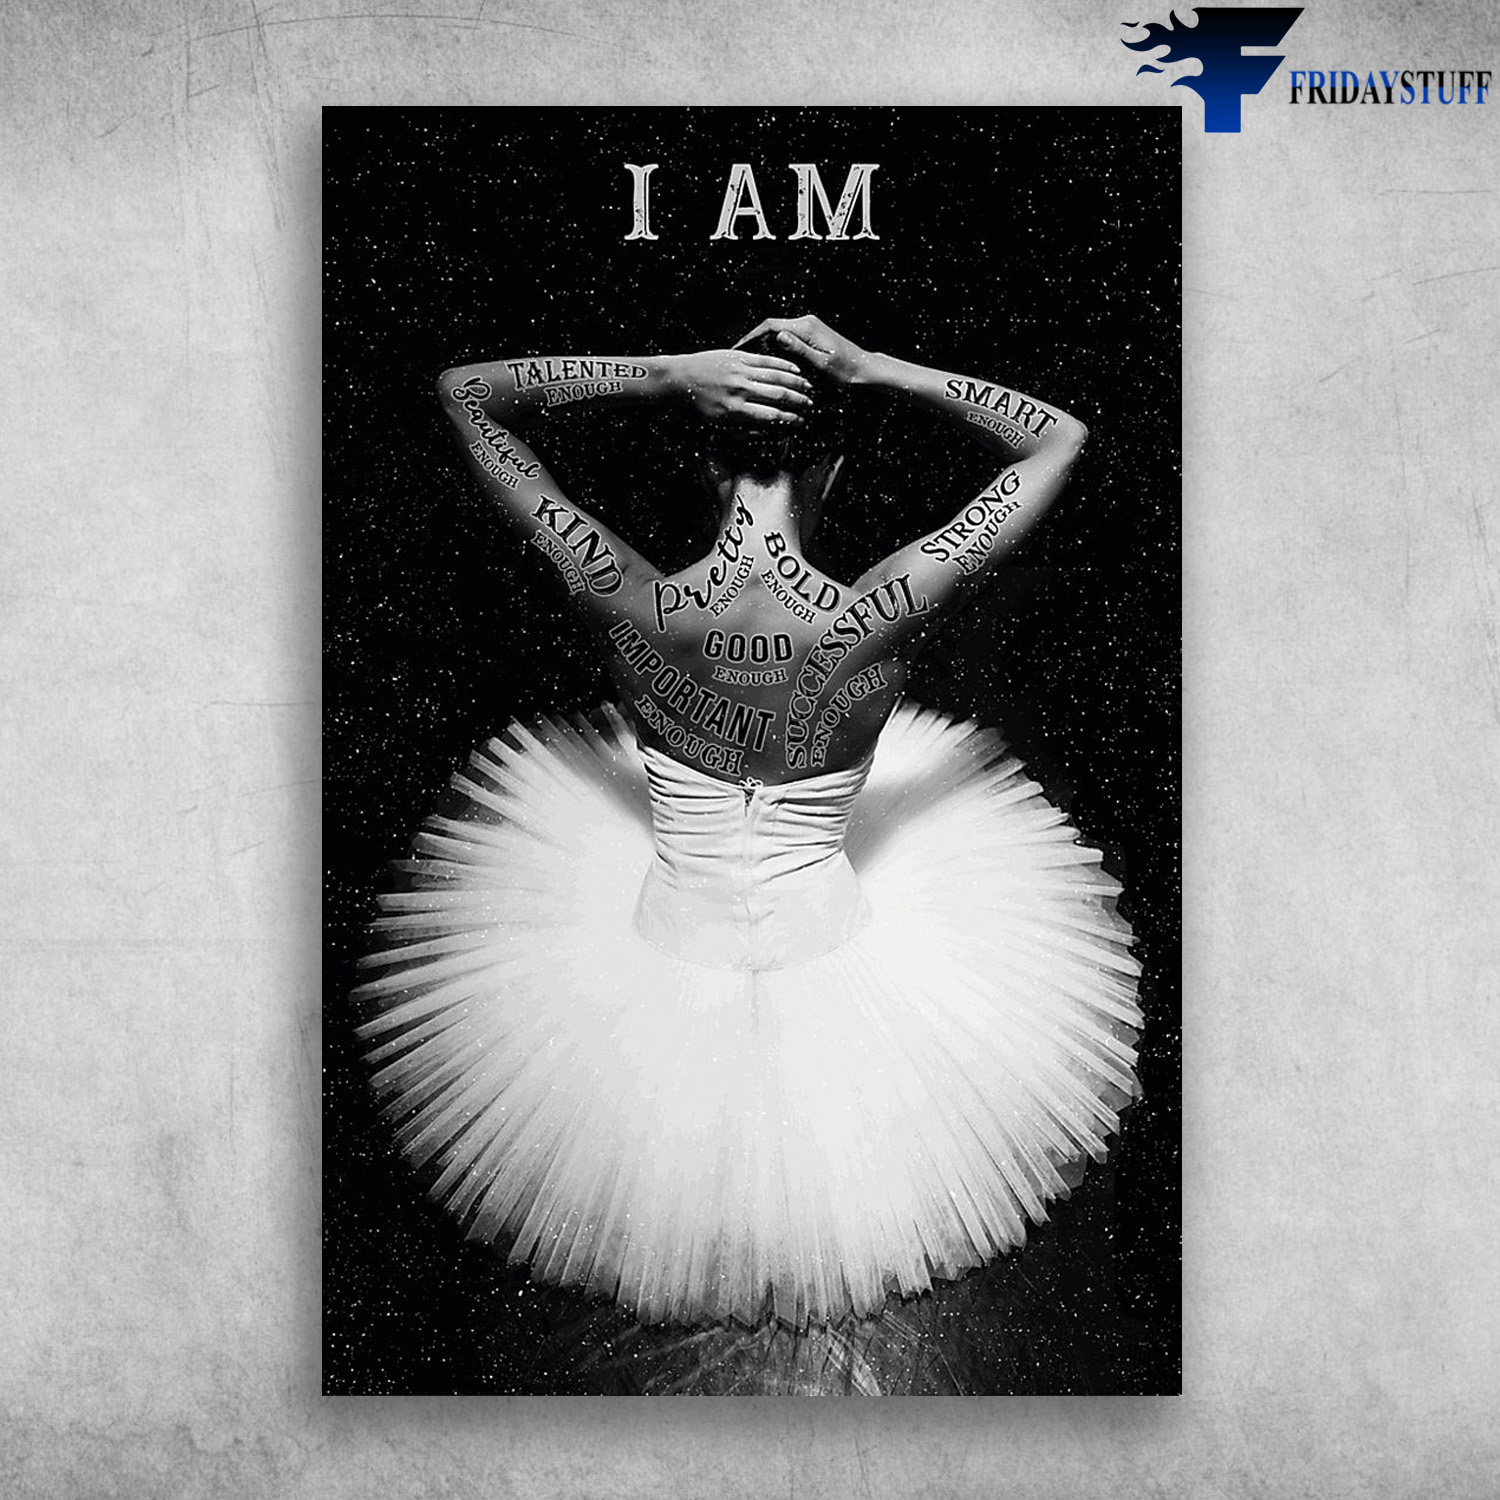 Ballet Dancer With White Dress - I Am Talented, Smart And Strong